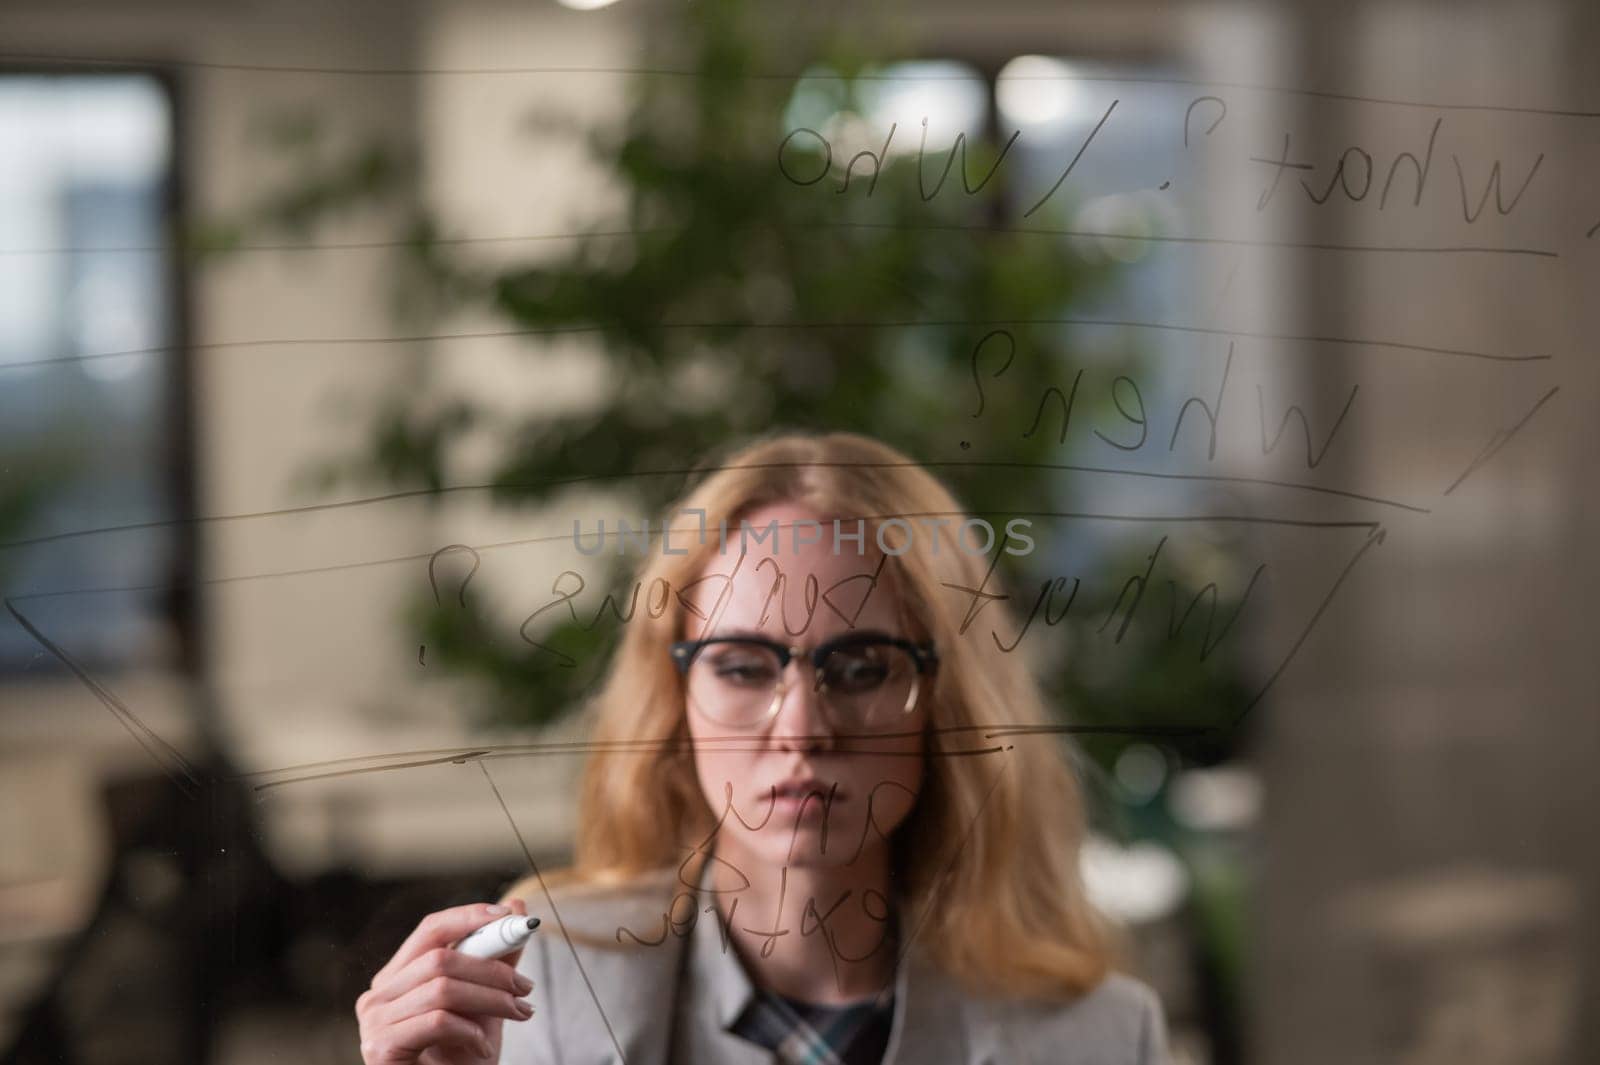 Caucasian woman writing pyramid diagram with questions on glass wall